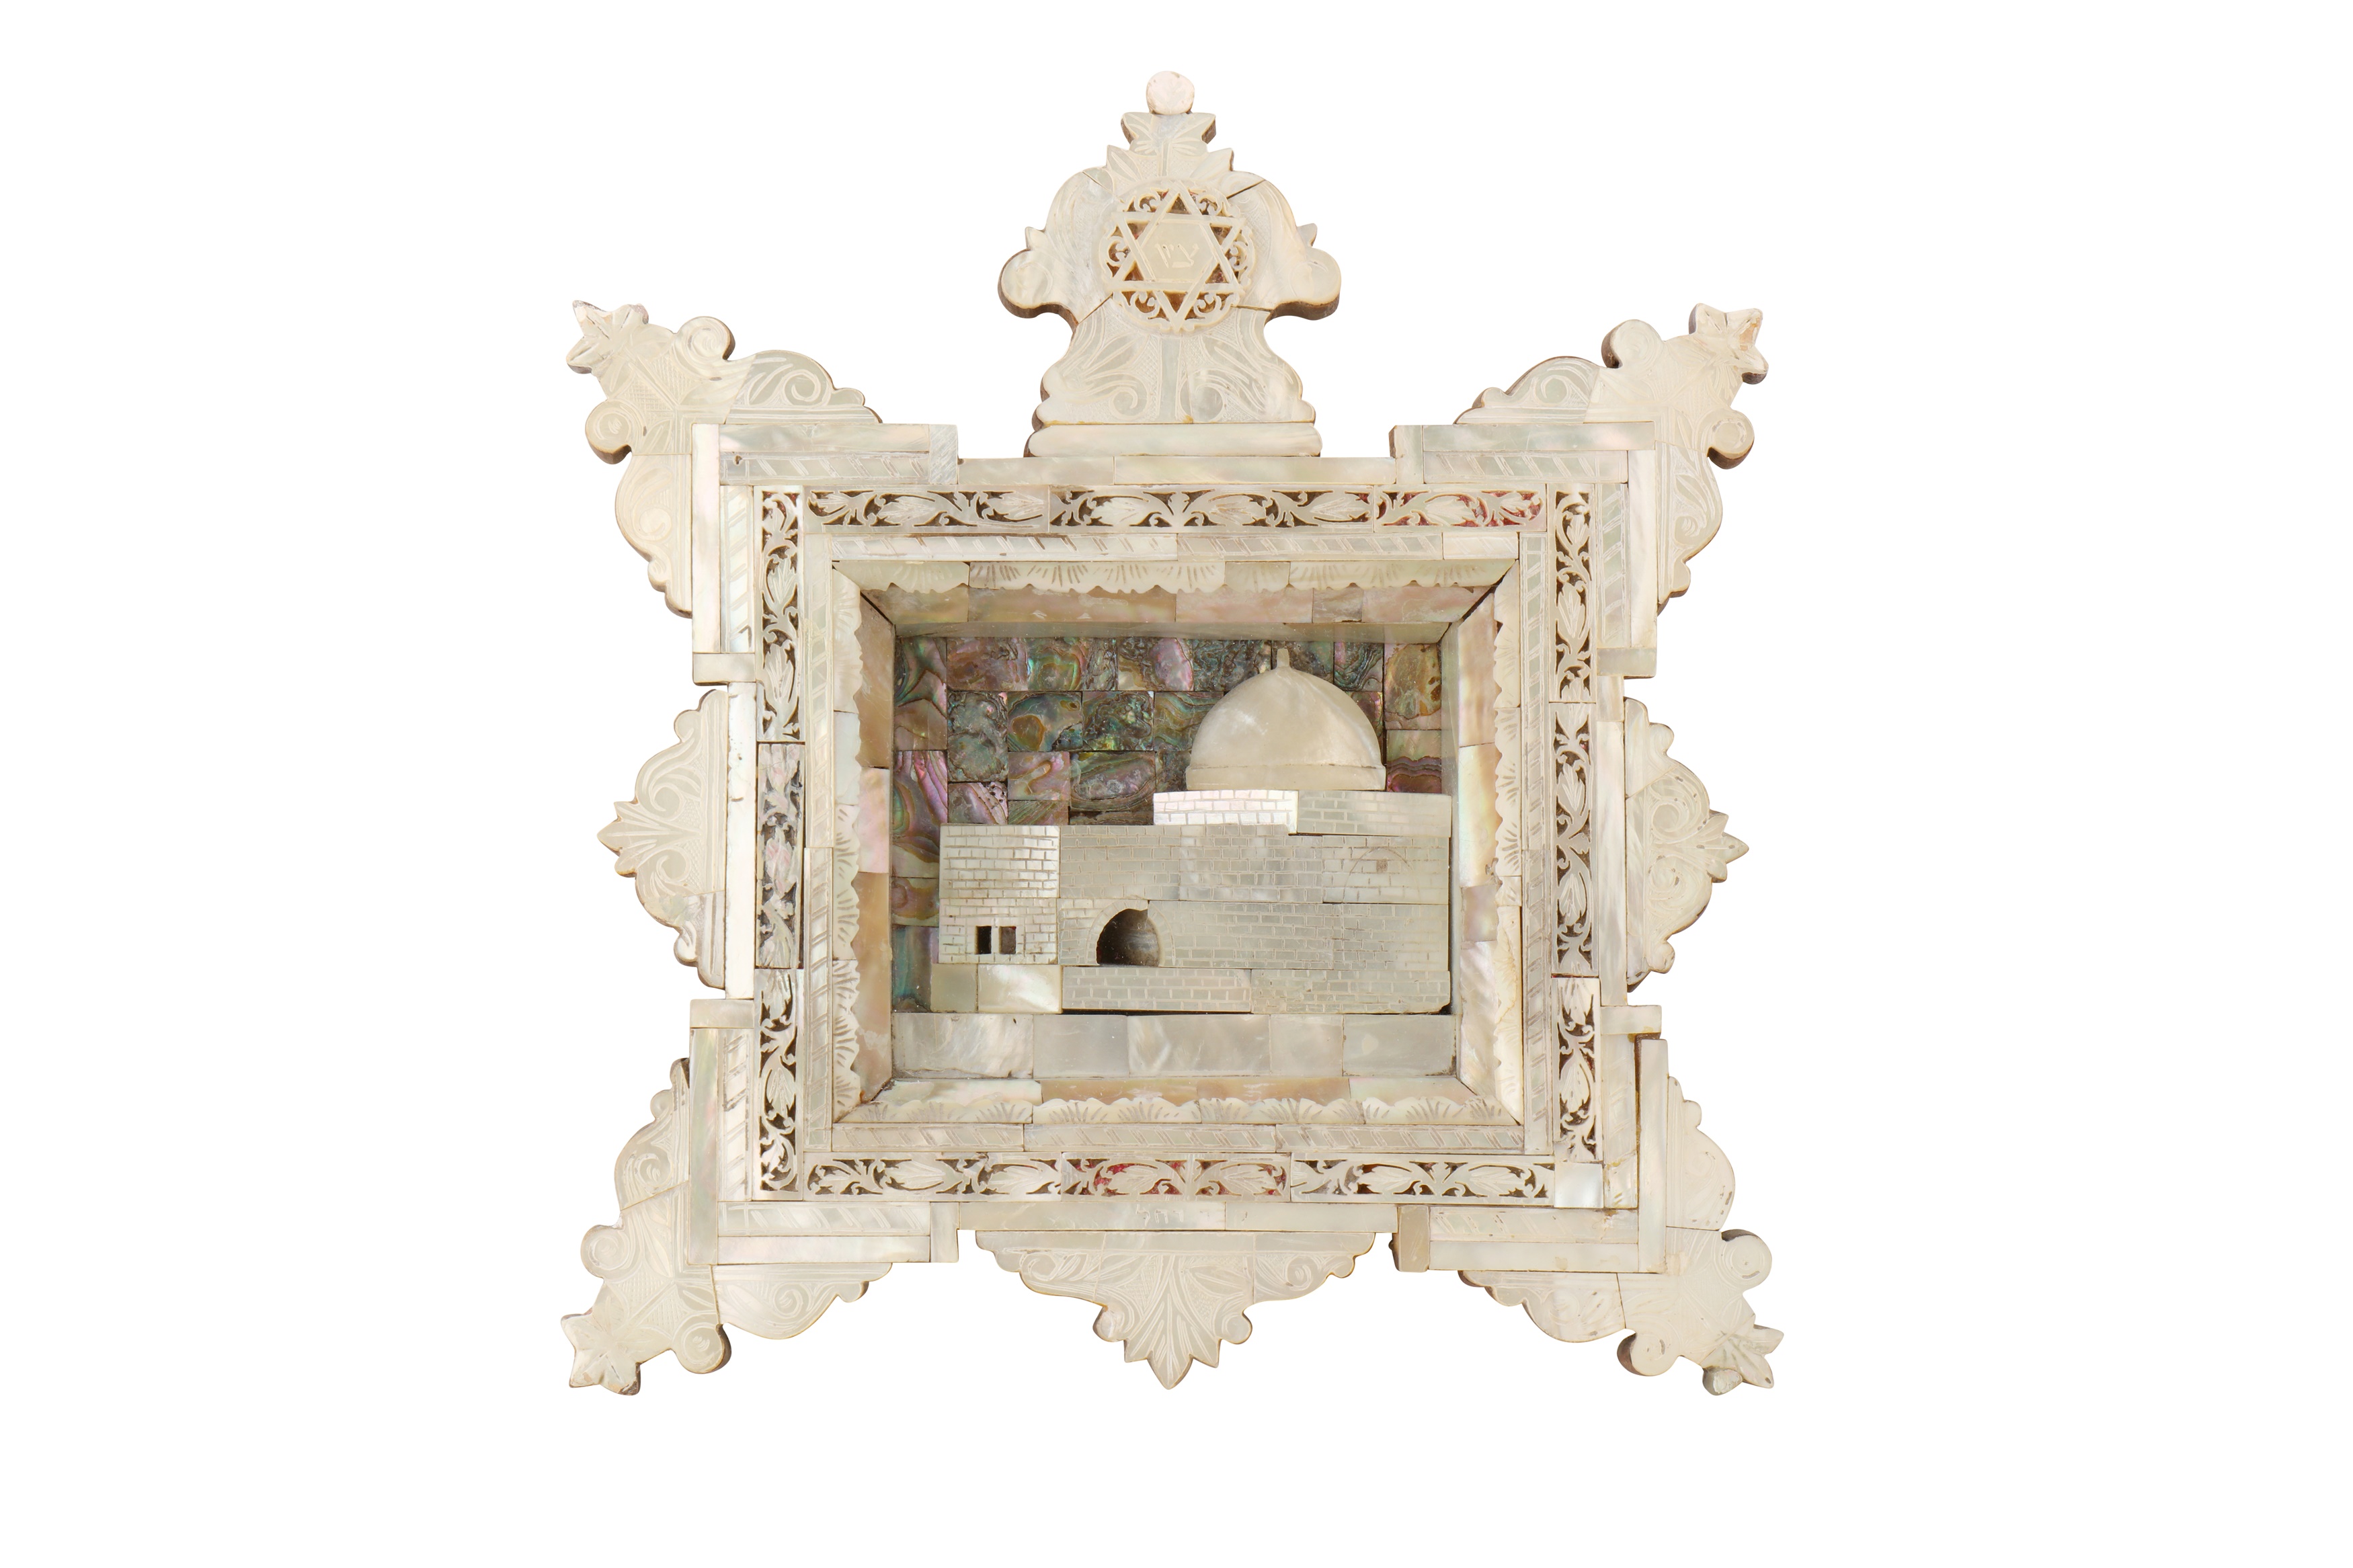 A MOTHER OF PEARL ICON DEPICTING THE TOMB OF RACHEL, JERUSALEM